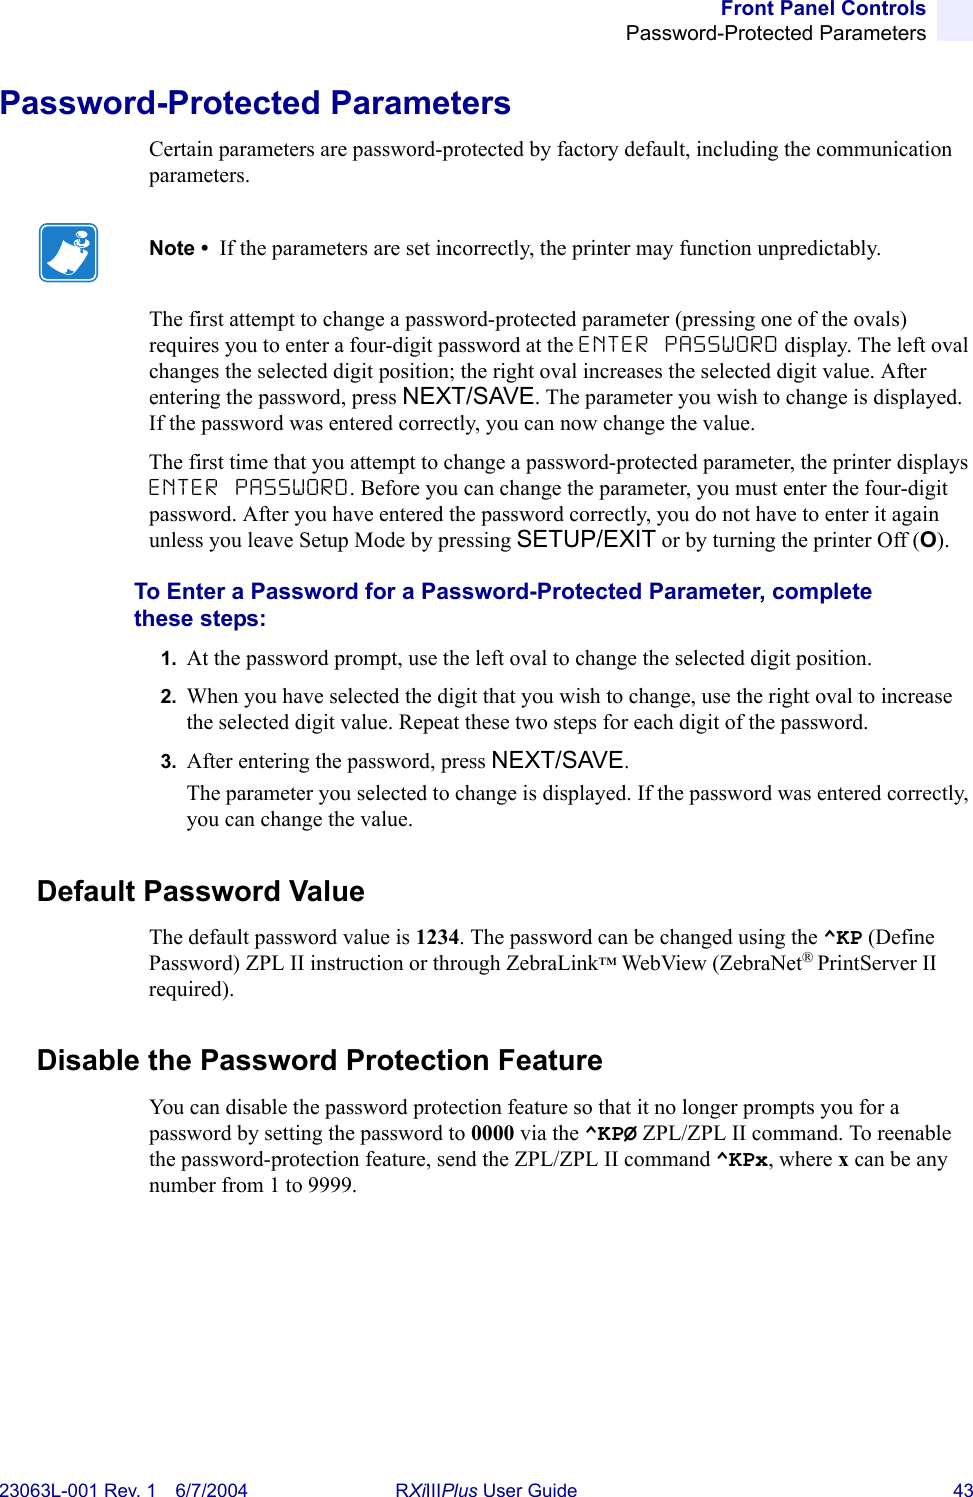 Front Panel ControlsPassword-Protected Parameters23063L-001 Rev. 1 6/7/2004 RXiIIIPlus User Guide 43Password-Protected ParametersCertain parameters are password-protected by factory default, including the communication parameters.The first attempt to change a password-protected parameter (pressing one of the ovals) requires you to enter a four-digit password at the ENTER PASSWORD display. The left oval changes the selected digit position; the right oval increases the selected digit value. After entering the password, press NEXT/SAVE. The parameter you wish to change is displayed. If the password was entered correctly, you can now change the value.The first time that you attempt to change a password-protected parameter, the printer displays ENTER PASSWORD. Before you can change the parameter, you must enter the four-digit password. After you have entered the password correctly, you do not have to enter it again unless you leave Setup Mode by pressing SETUP/EXIT or by turning the printer Off (O).To Enter a Password for a Password-Protected Parameter, complete these steps:1. At the password prompt, use the left oval to change the selected digit position.2. When you have selected the digit that you wish to change, use the right oval to increase the selected digit value. Repeat these two steps for each digit of the password.3. After entering the password, press NEXT/SAVE.The parameter you selected to change is displayed. If the password was entered correctly, you can change the value.Default Password ValueThe default password value is 1234. The password can be changed using the ^KP (Define Password) ZPL II instruction or through ZebraLink™ WebView (ZebraNet®PrintServer II required).Disable the Password Protection FeatureYou can disable the password protection feature so that it no longer prompts you for a password by setting the password to 0000 via the ^KPØ ZPL/ZPL II command. To reenable the password-protection feature, send the ZPL/ZPL II command ^KPx, where x can be any number from 1 to 9999.Note •  If the parameters are set incorrectly, the printer may function unpredictably.